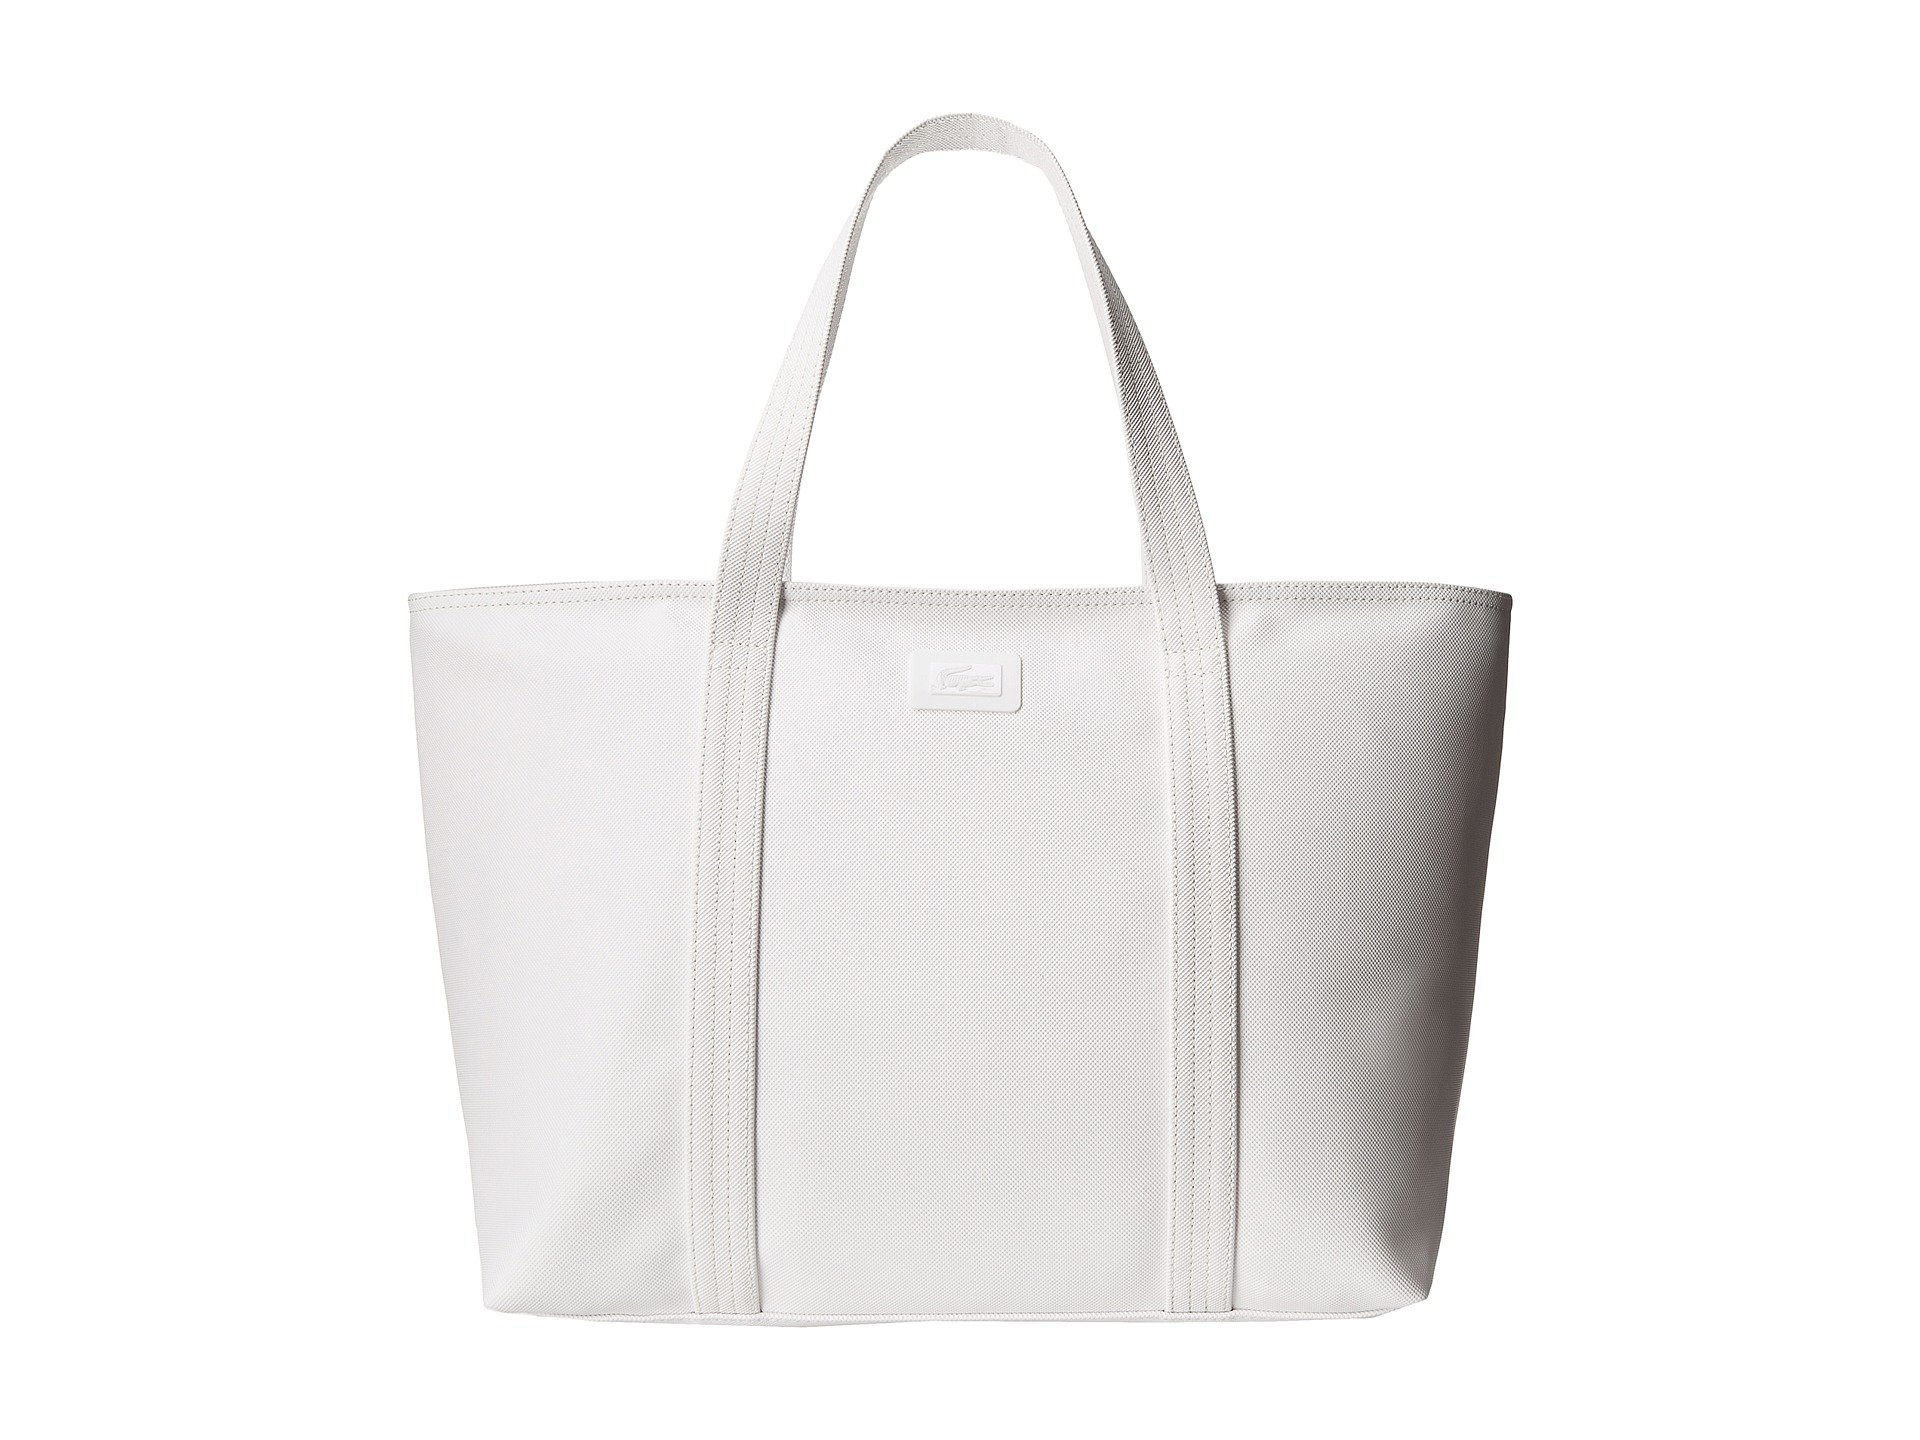 Lacoste Classic Large Shopping Bag in Bright White (White) - Lyst